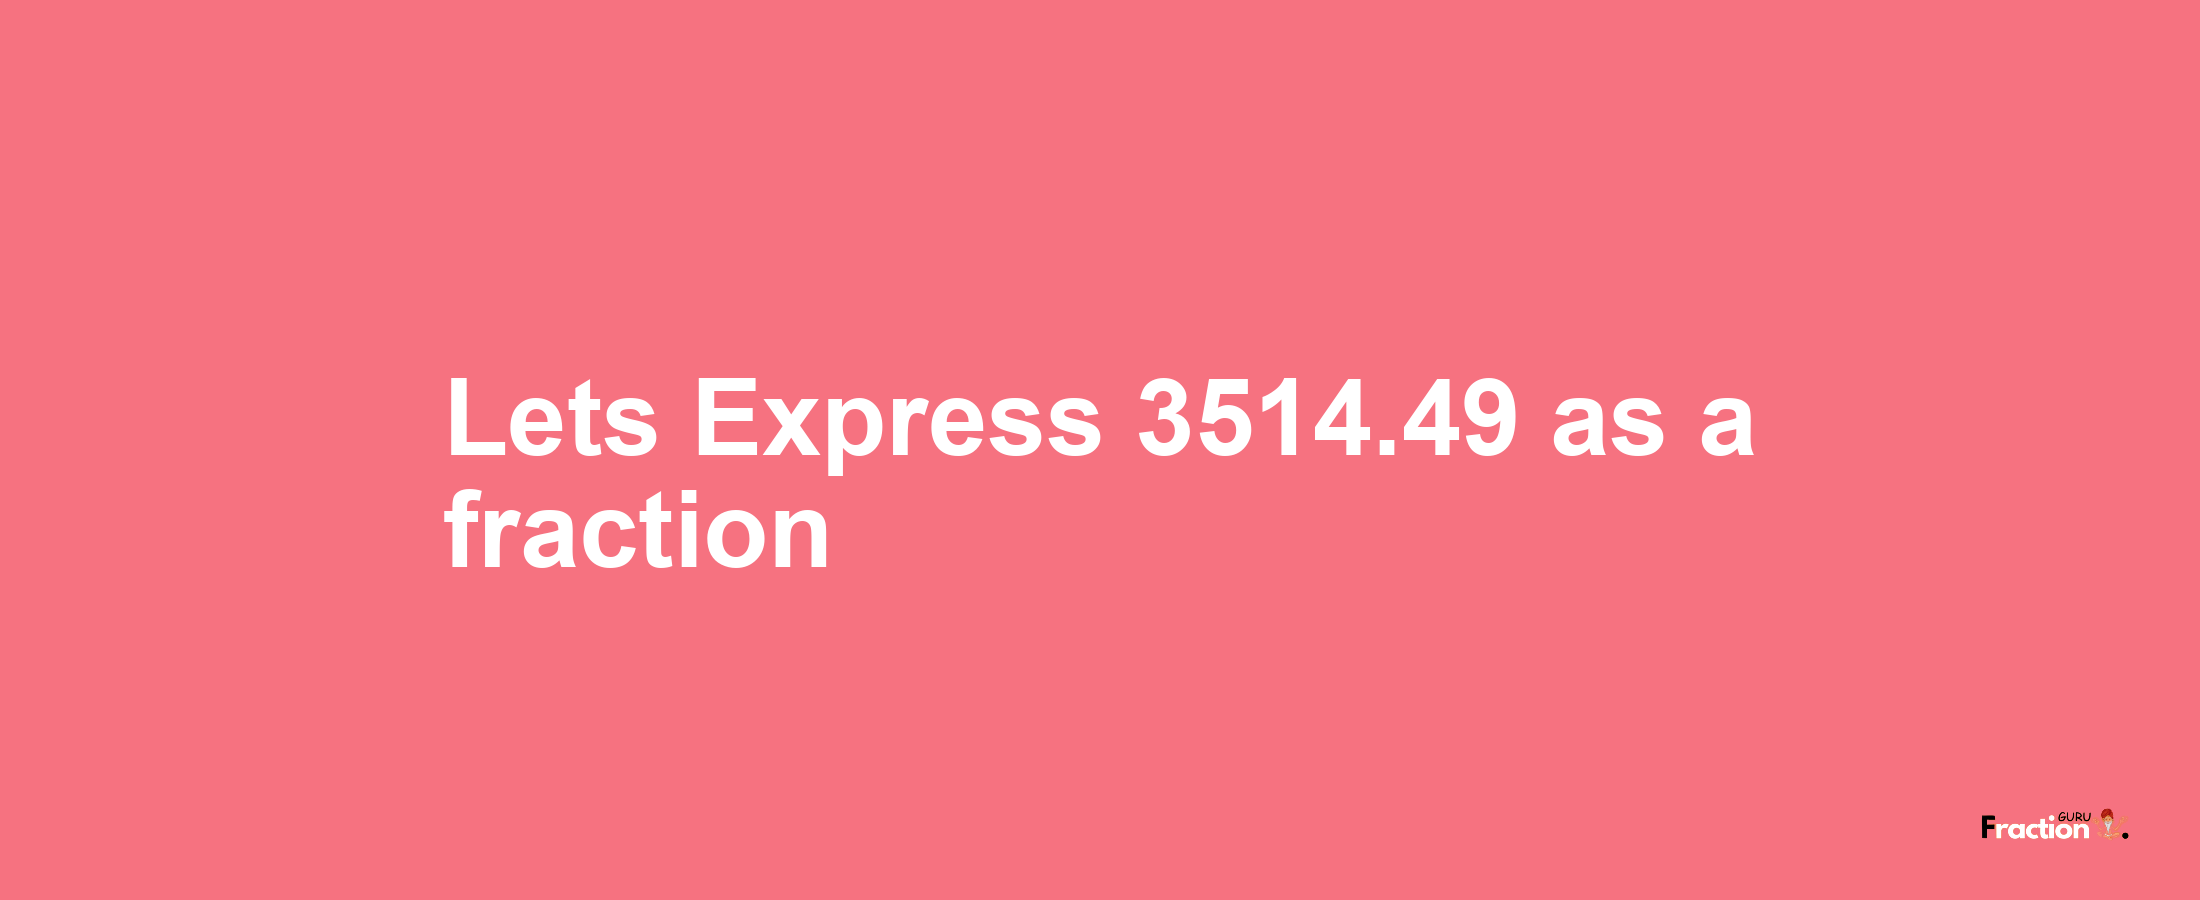 Lets Express 3514.49 as afraction